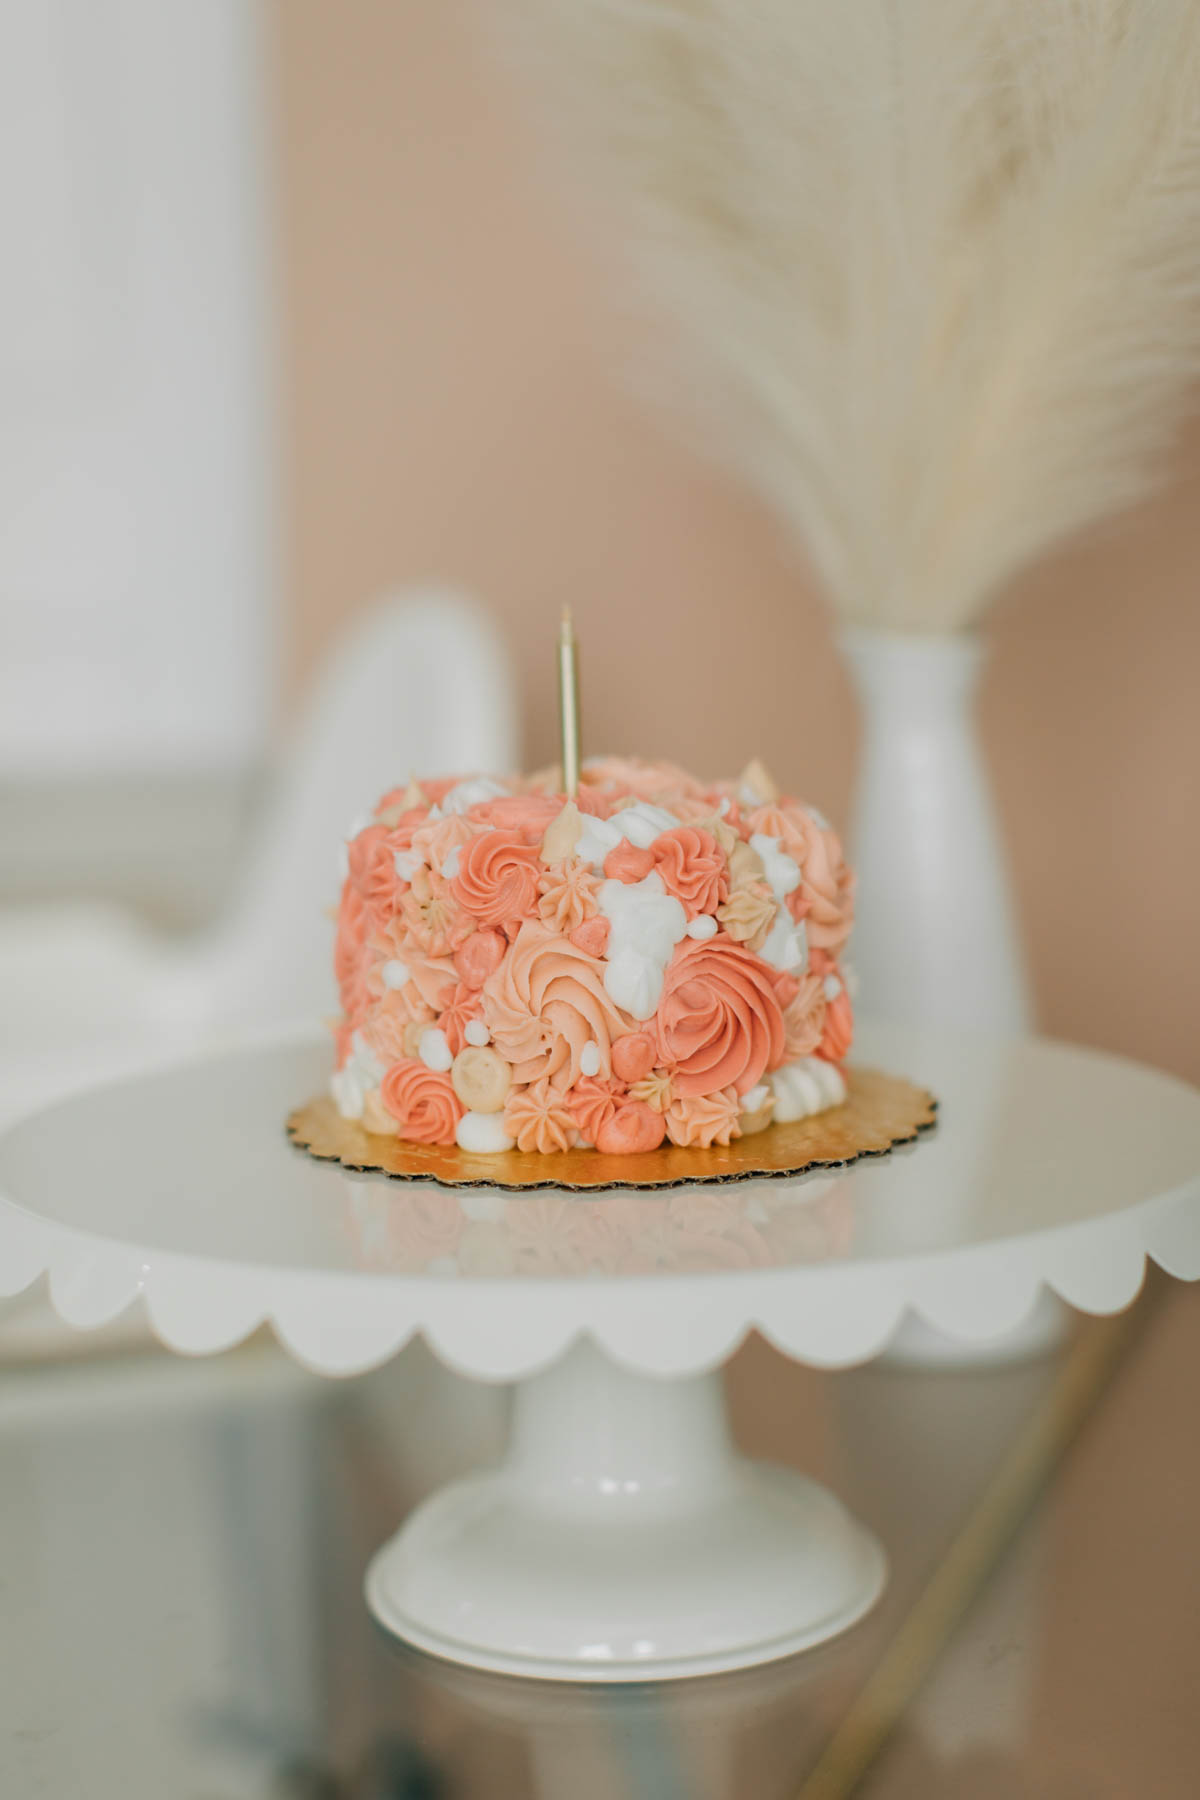 Boho smash cake with white, tan, and pink frosting swirls on white cake stand.